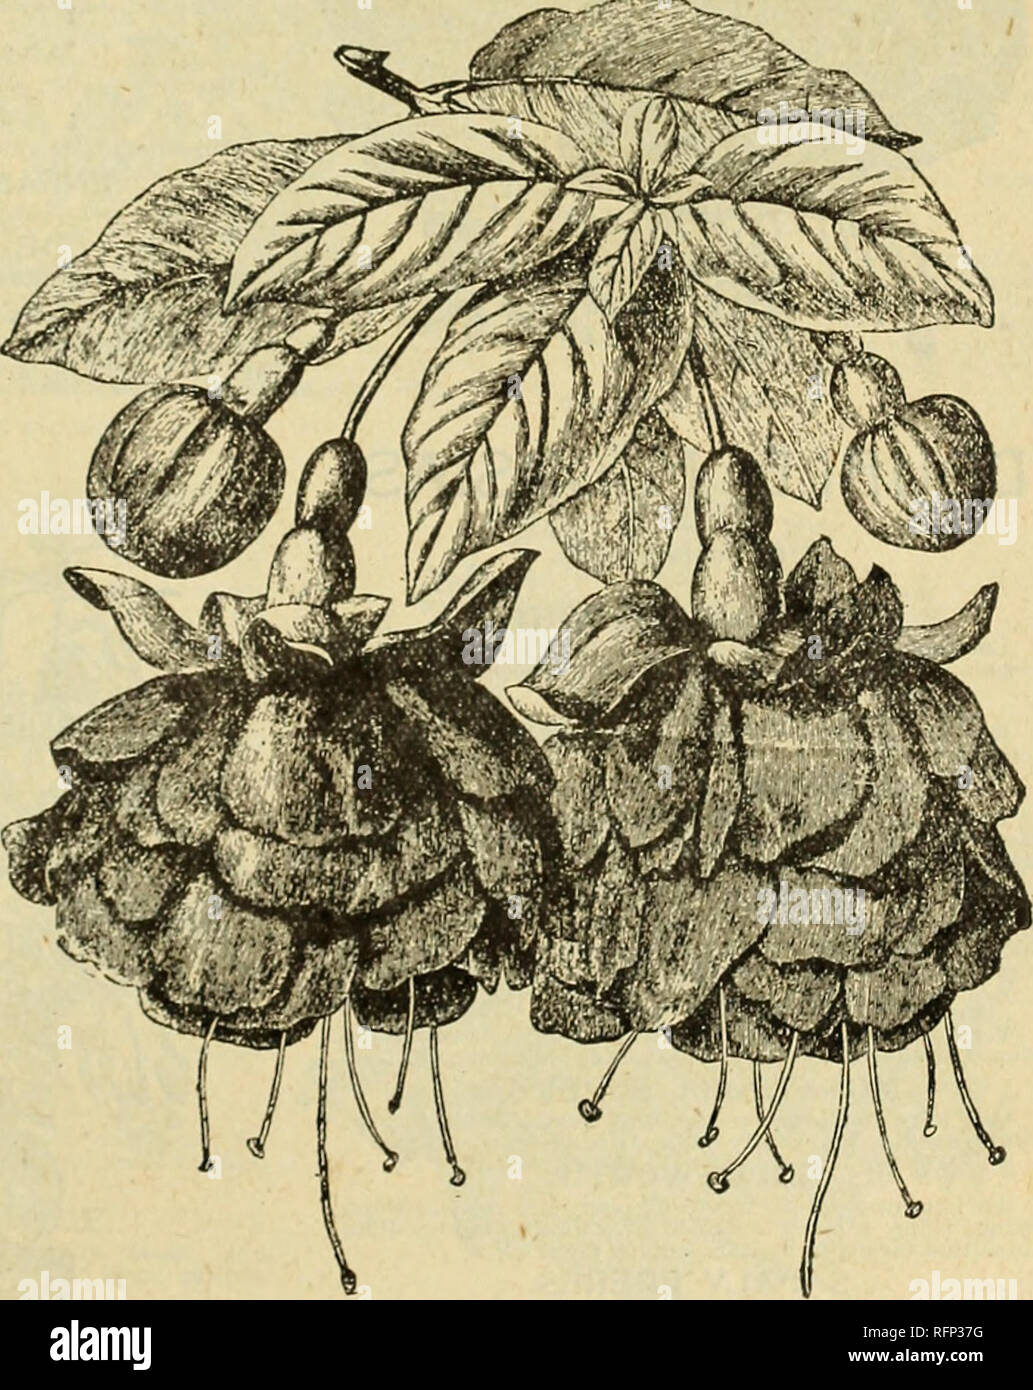 . Spring 1896. Nursery stock Ohio Catalogs; Roses Ohio Catalogs; Flowers Catalogs; Vegetables Catalogs; Nursery stock; Roses; Flowers; Vegetables. THE NATIONAL PLANT COMPANY, FLORISTS, DAYTON, OHIO. 47 4hh • SELECT • bIST • OF . FUCHSIAS. 1^1 This beautiful novelty, introduced a few years since, is a decided acquisition, and deserves a place in every garden. It is of a dwarf, compact growth, branches numerous, leaves small and of a beautiful glowing green color. The buds for two weeks before they expand are balls of glowing crimson. The sepals are of the same glowing scarlet-crimson as the bu Stock Photo